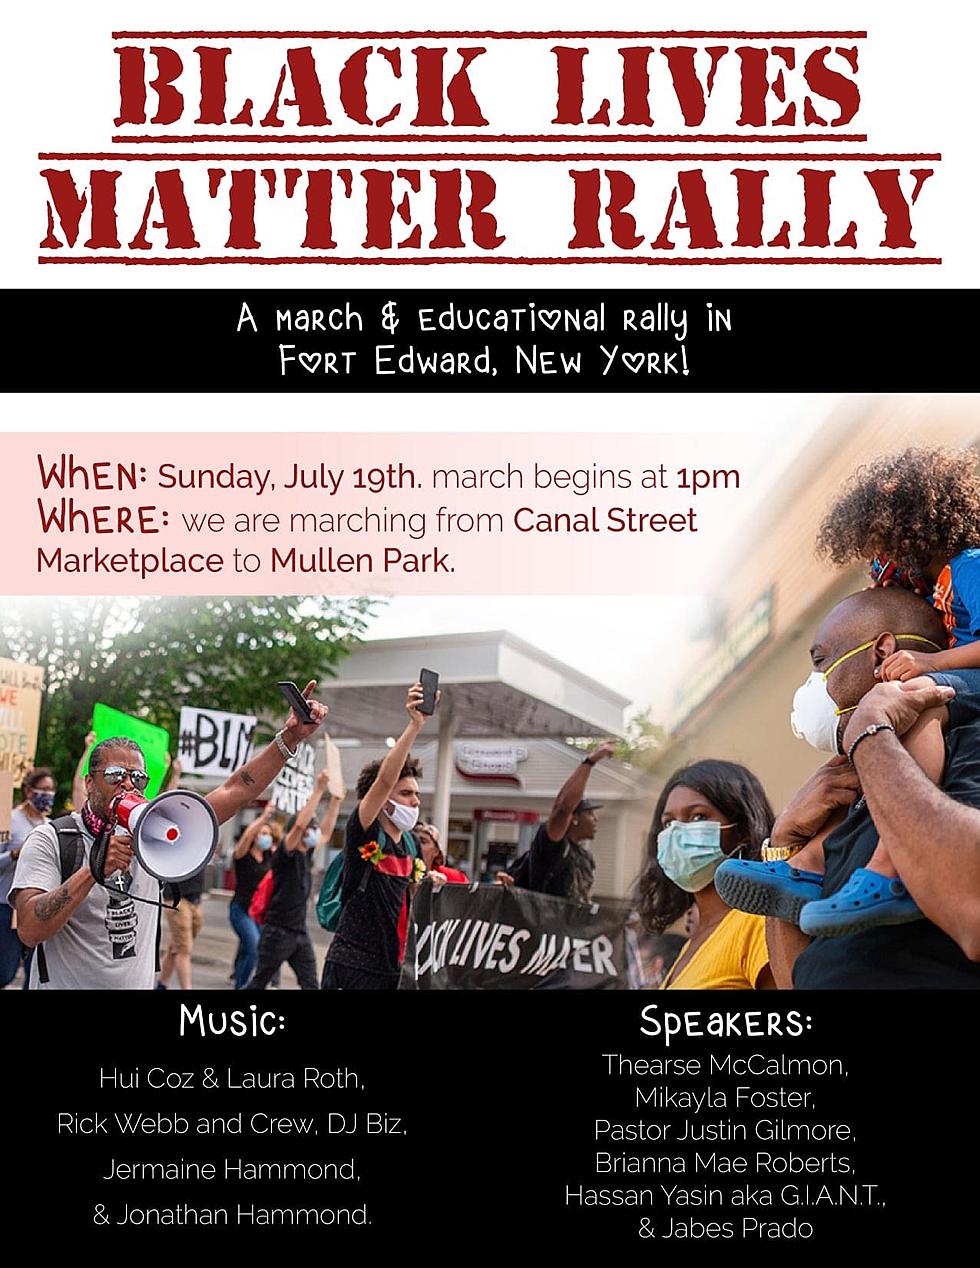 Black Lives Matter Rally In Fort Edward